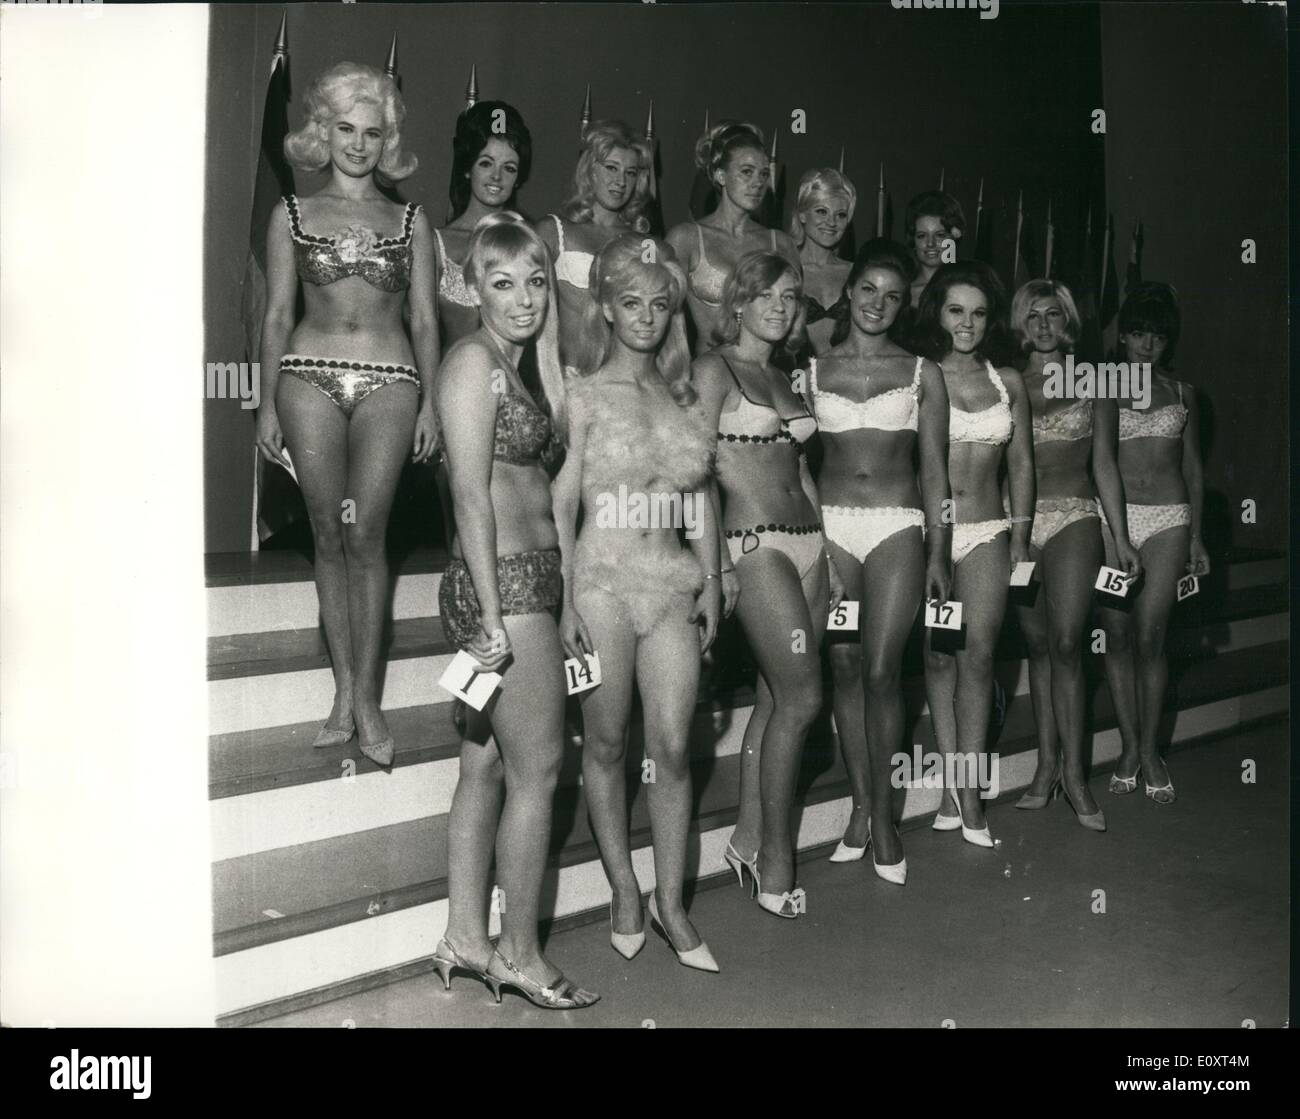 Sep. 09, 1967 - ''Miss Bikini 1967'' contest held at the Victoria Palace:  Judging for the ''Miss Bikini 1967'' contest, organized by the National  Amateur Body-Builders Association, was taking place today a